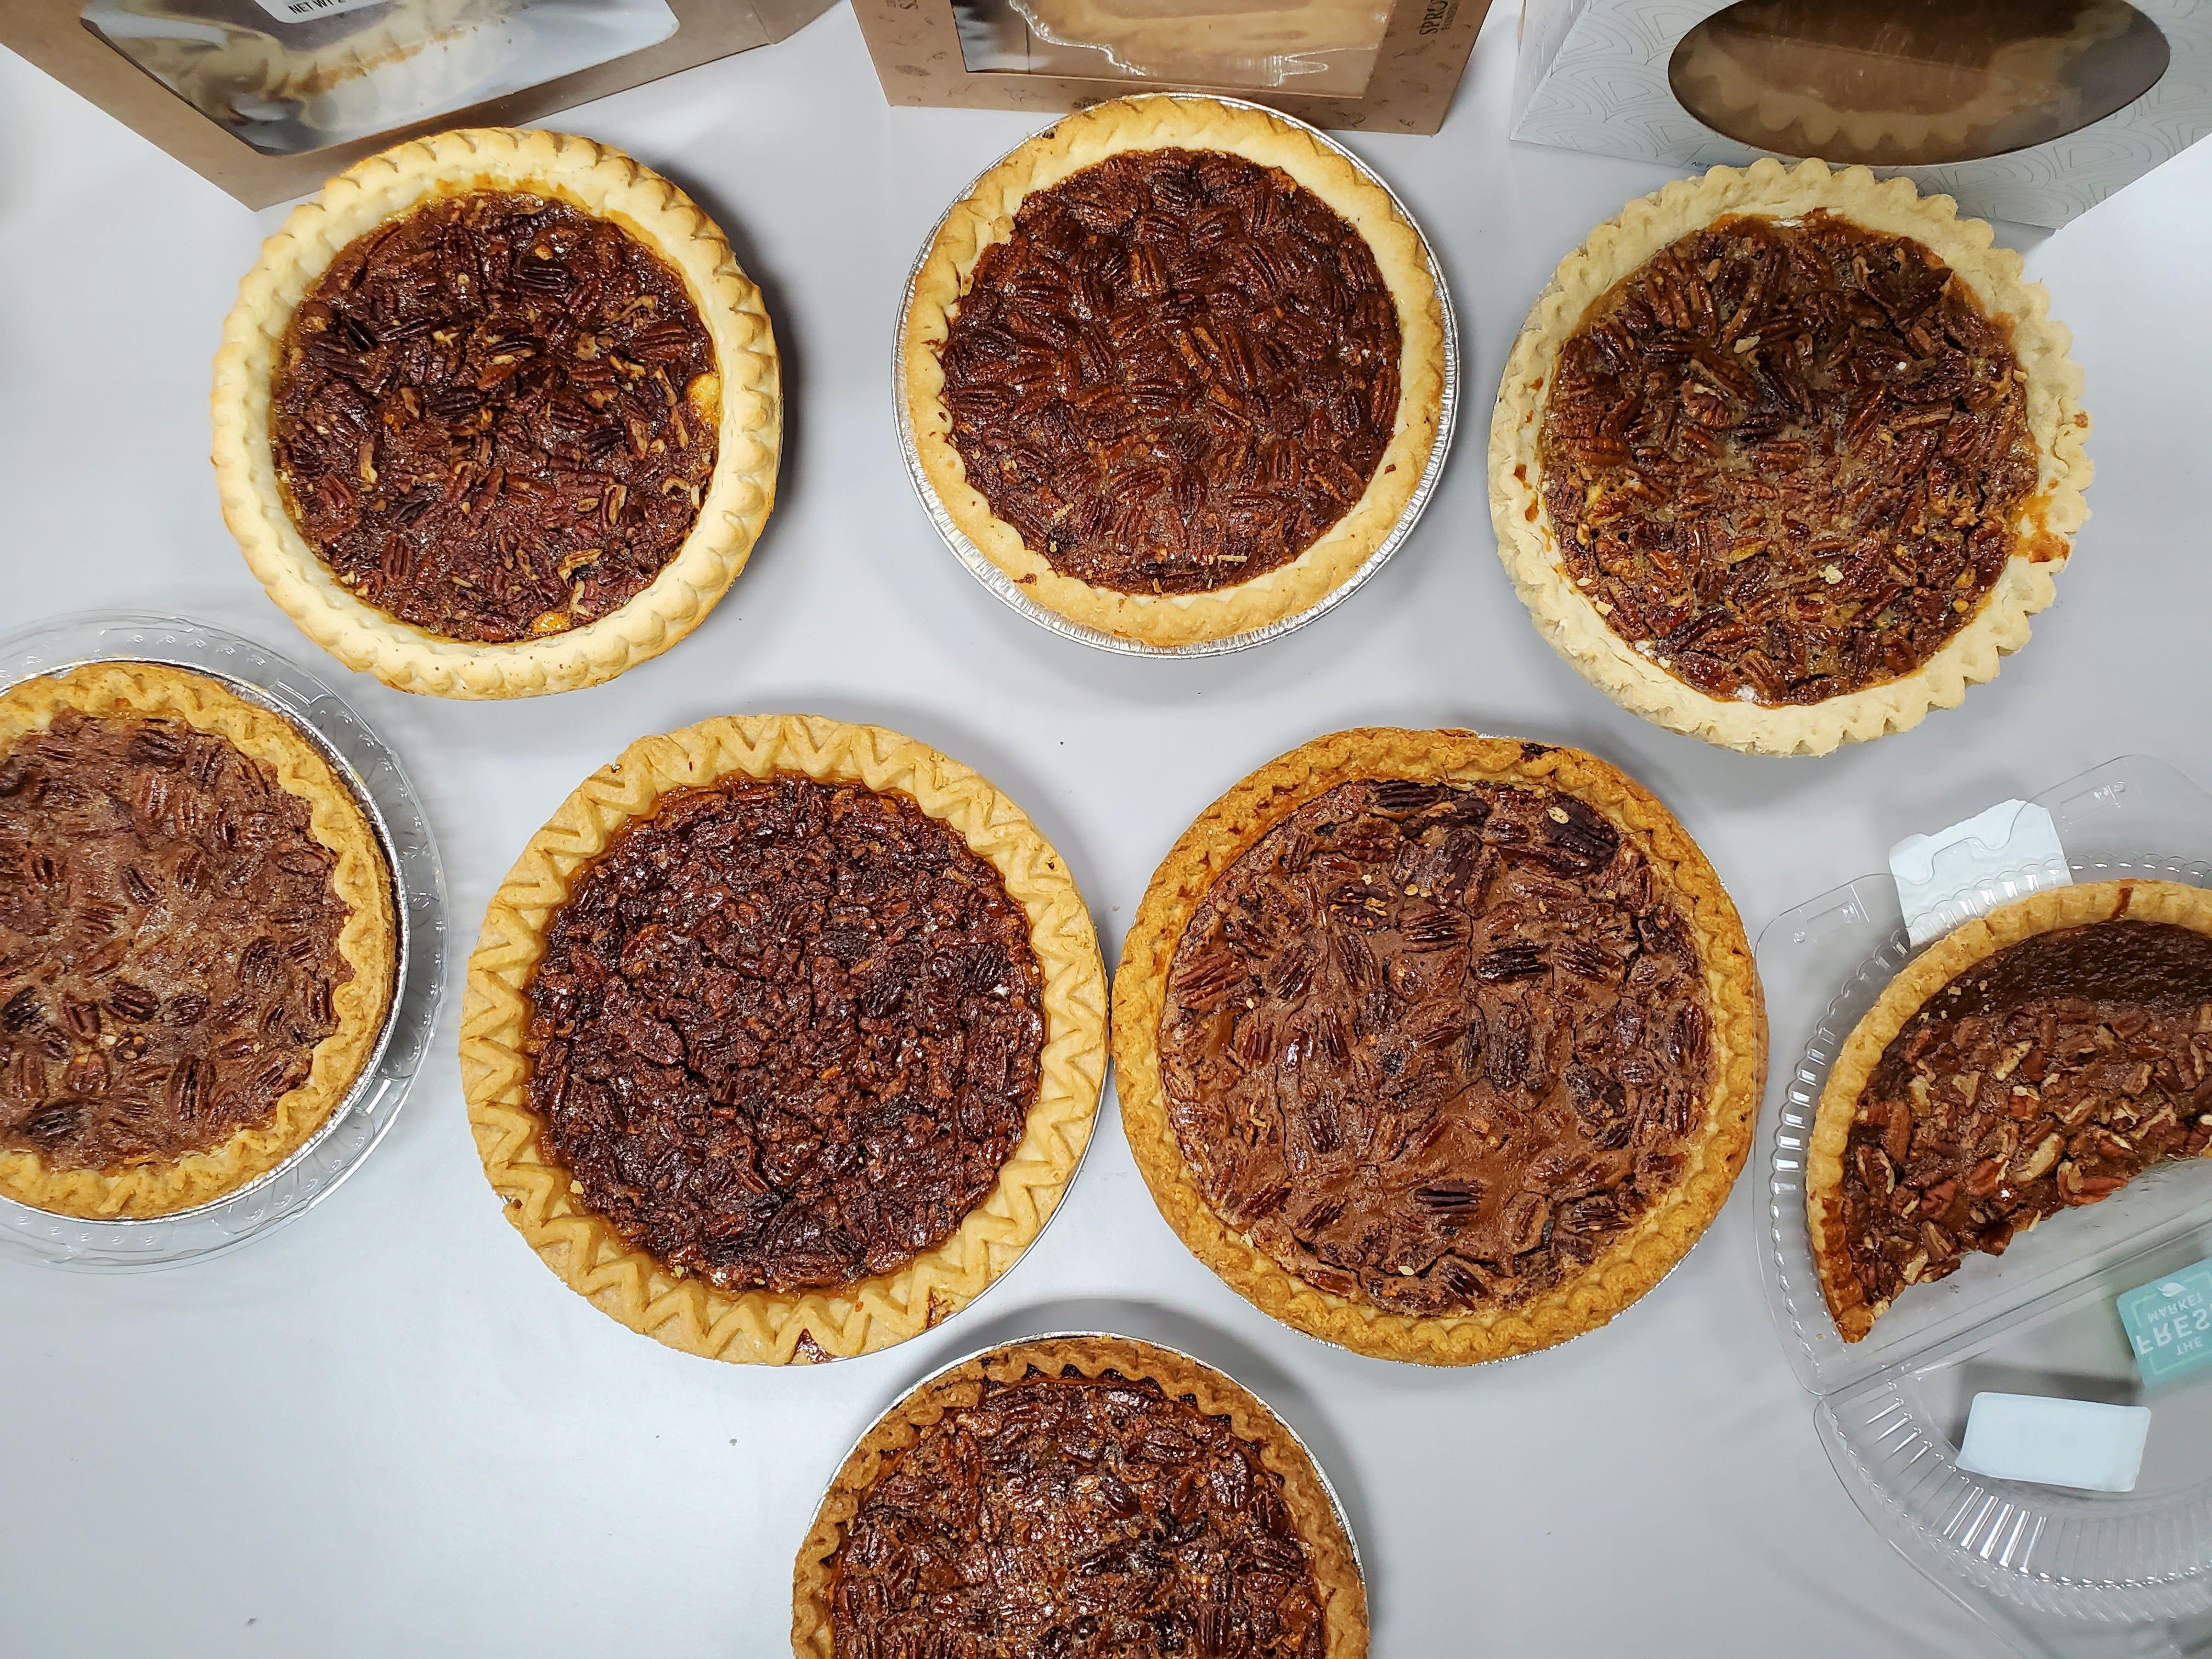 The eight pecan pies sampled as part of the judging. Left to right: Harris Teeter, Walmart, Marie Callender